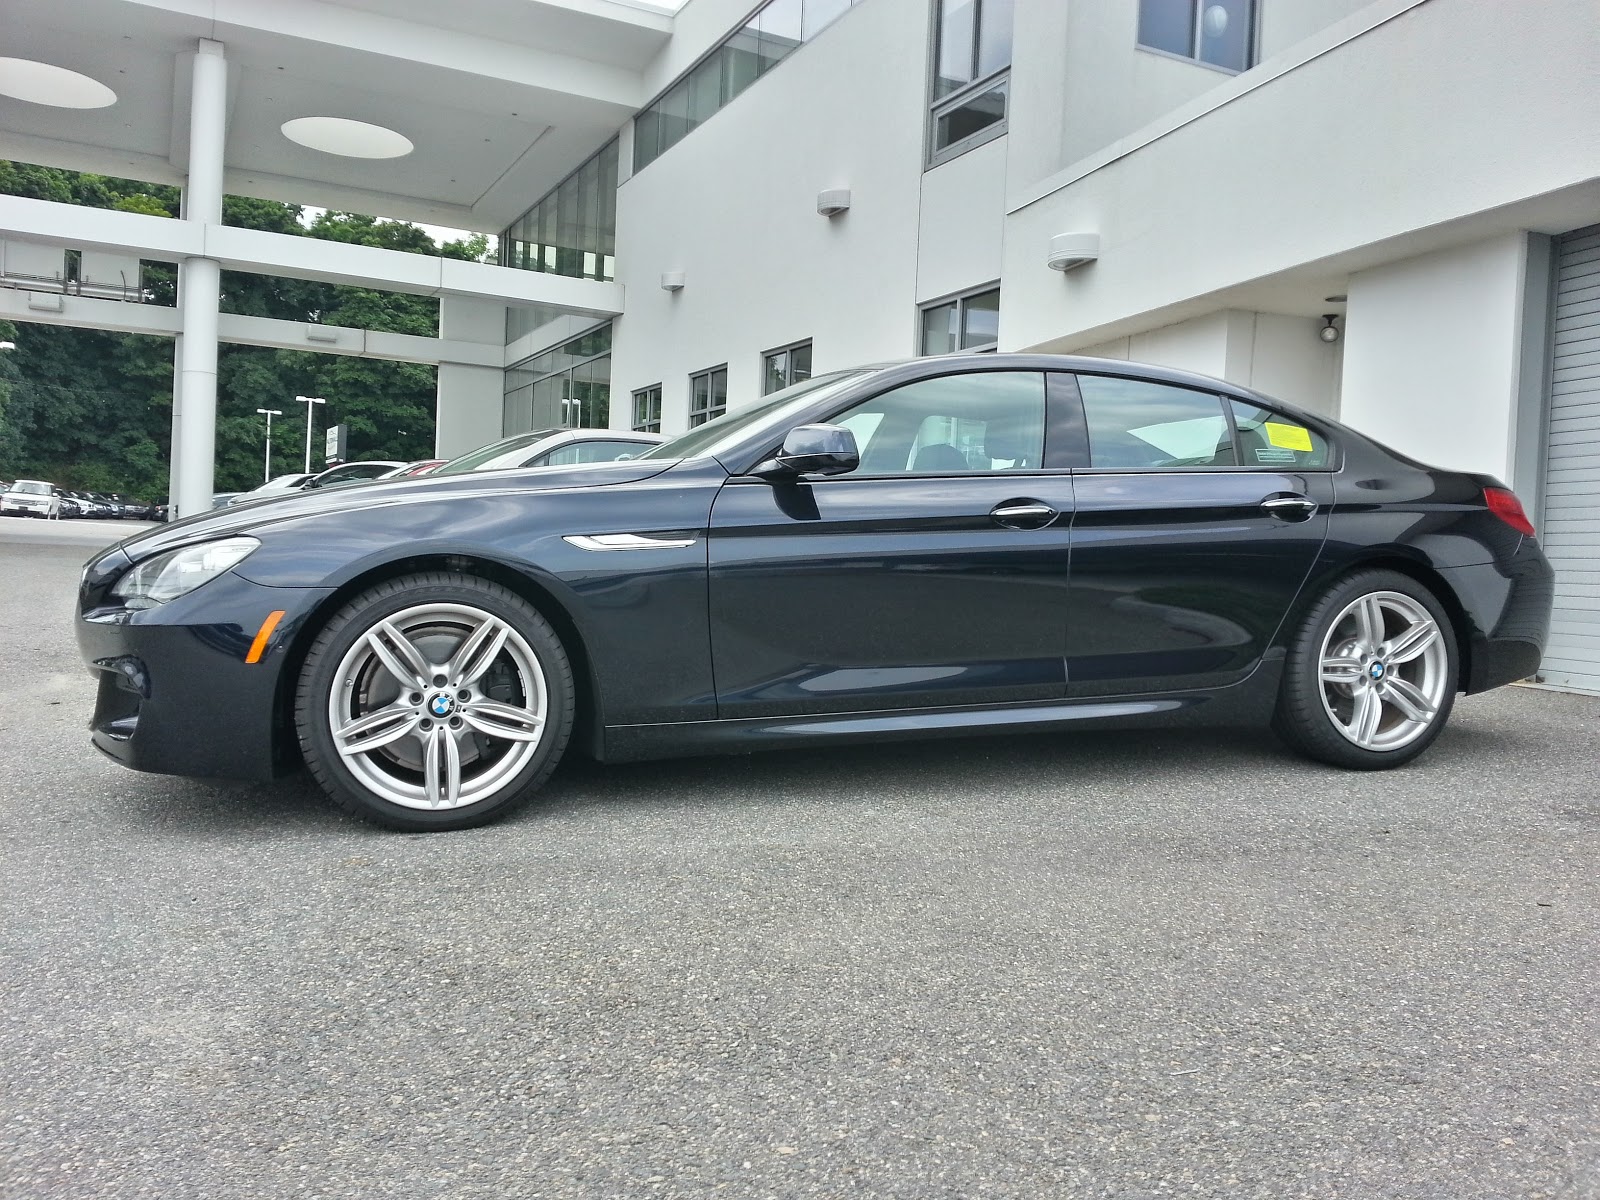 East-West Brothers Garage: Test Drive: 2014 BMW 650i xDrive Gran Coupe